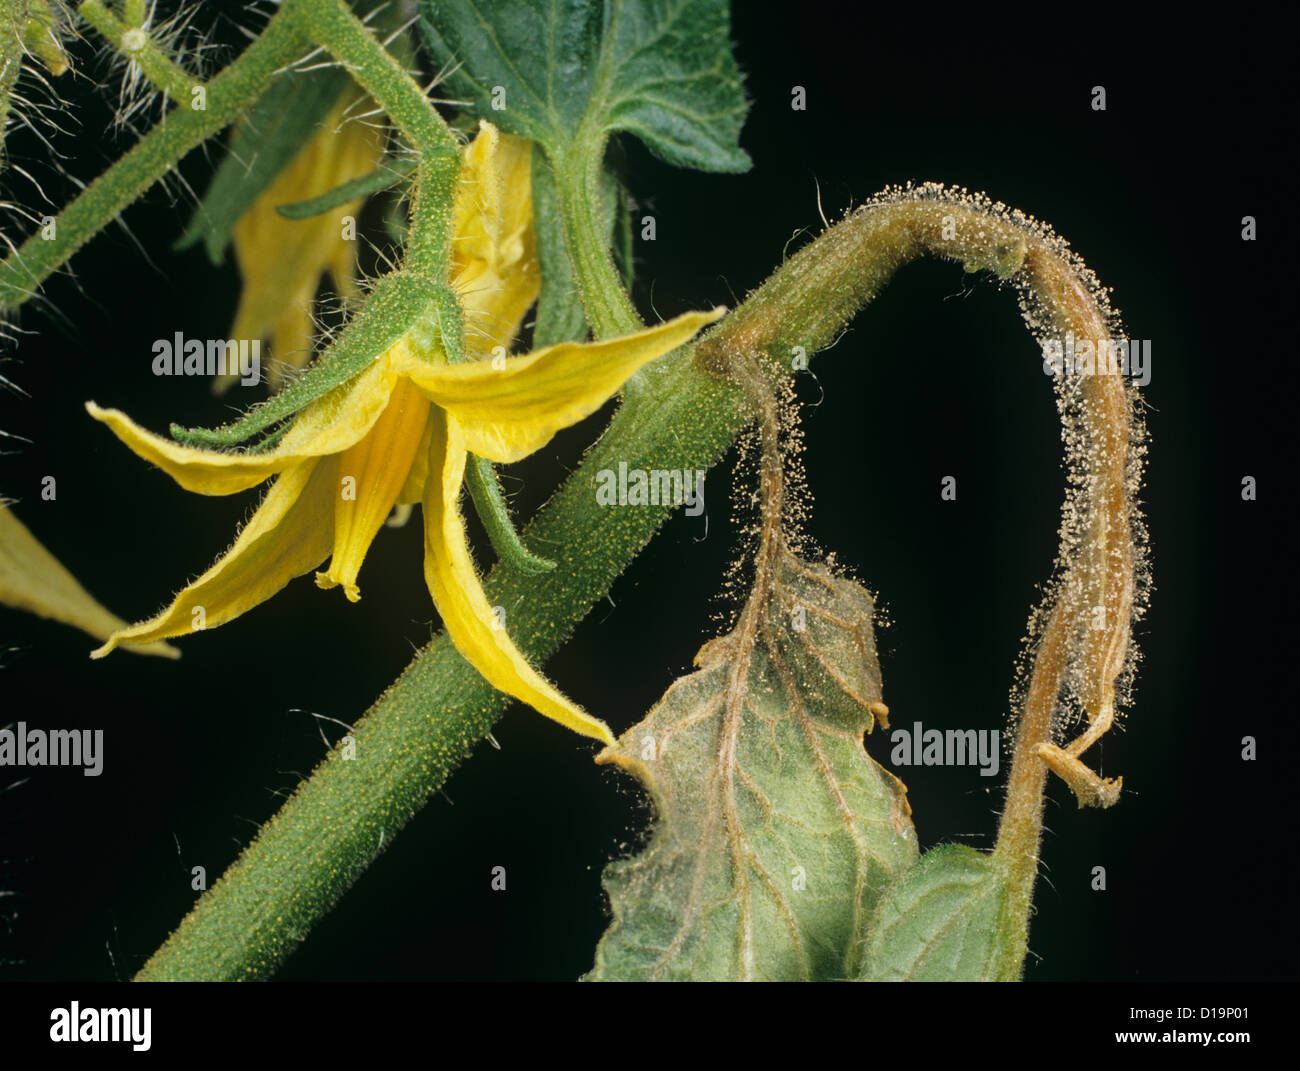 rey mould (Botrytis cinerea) developing on tomato leaves during flowering Stock Photo